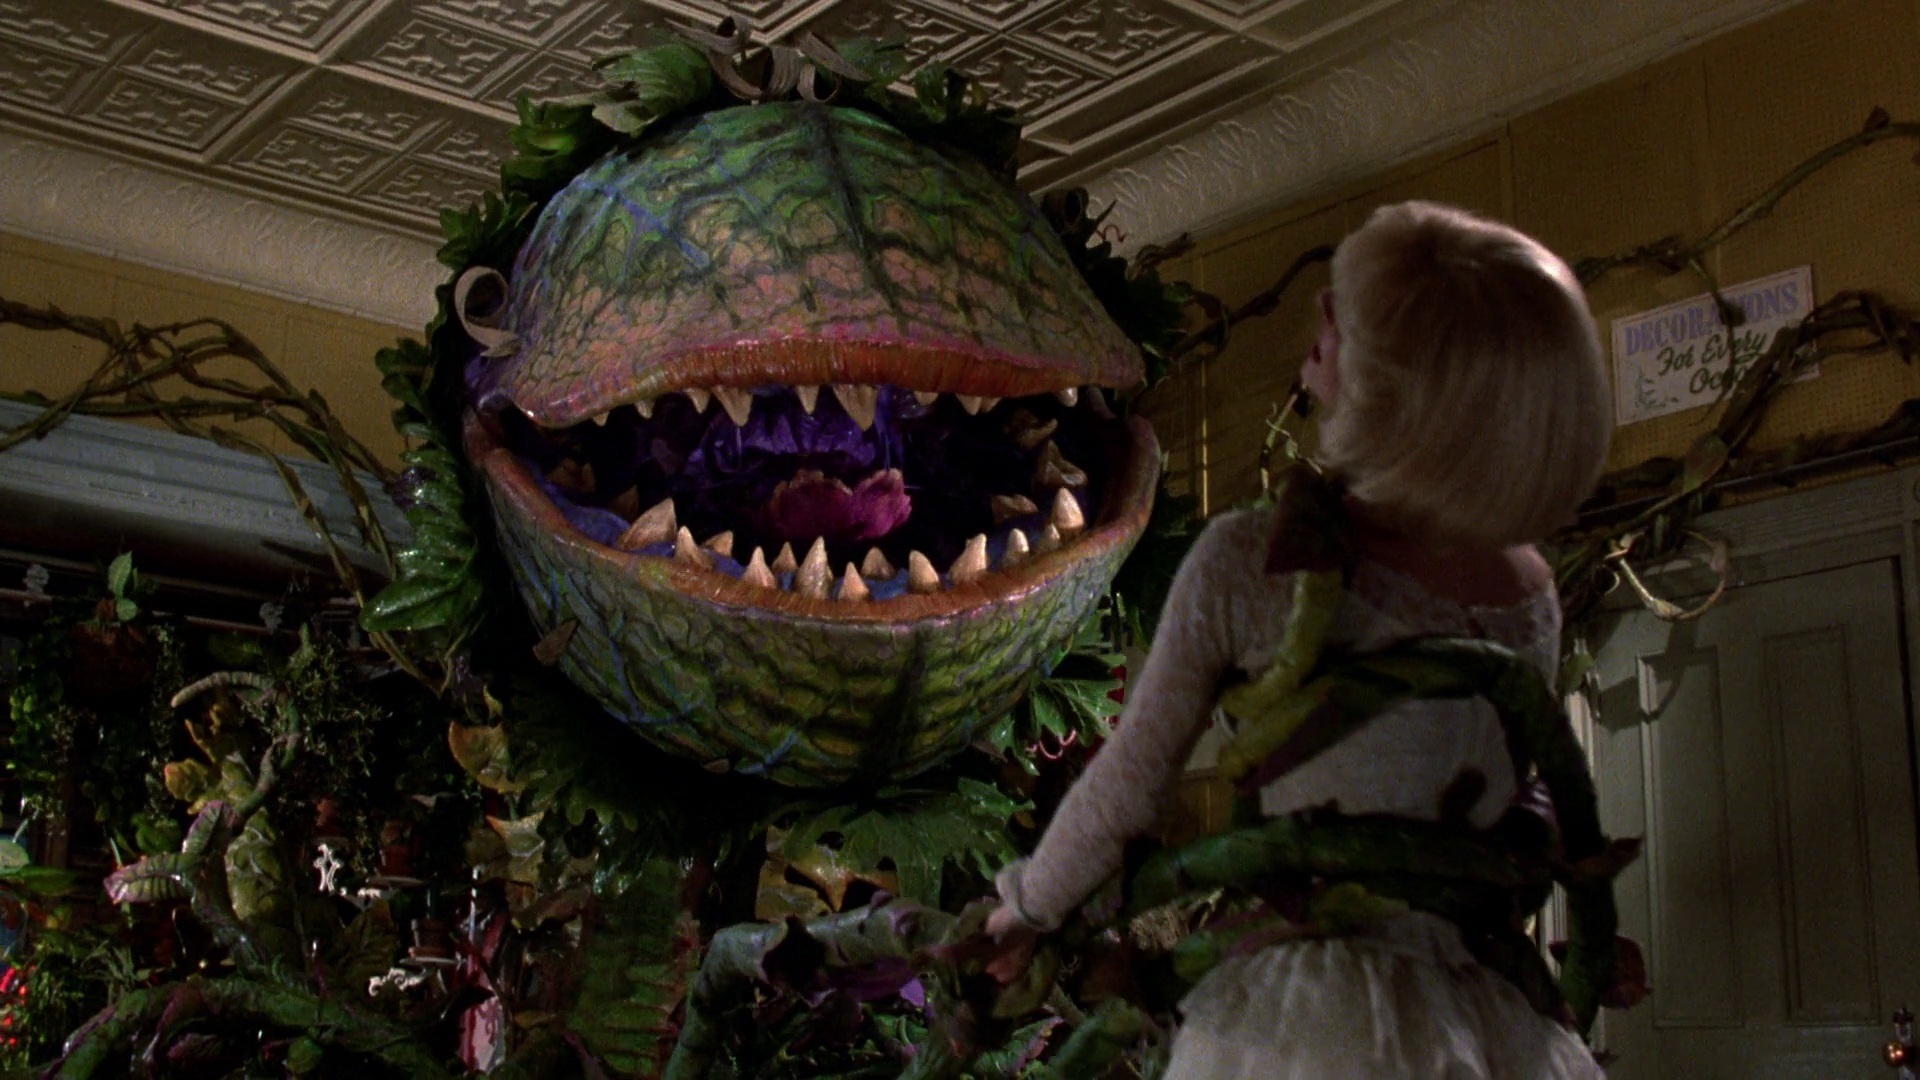 This is a film still from LITTLE SHOP OF HORRORS shoing a giant monstrous plant holding a woman - Audrey - in its tendrils.